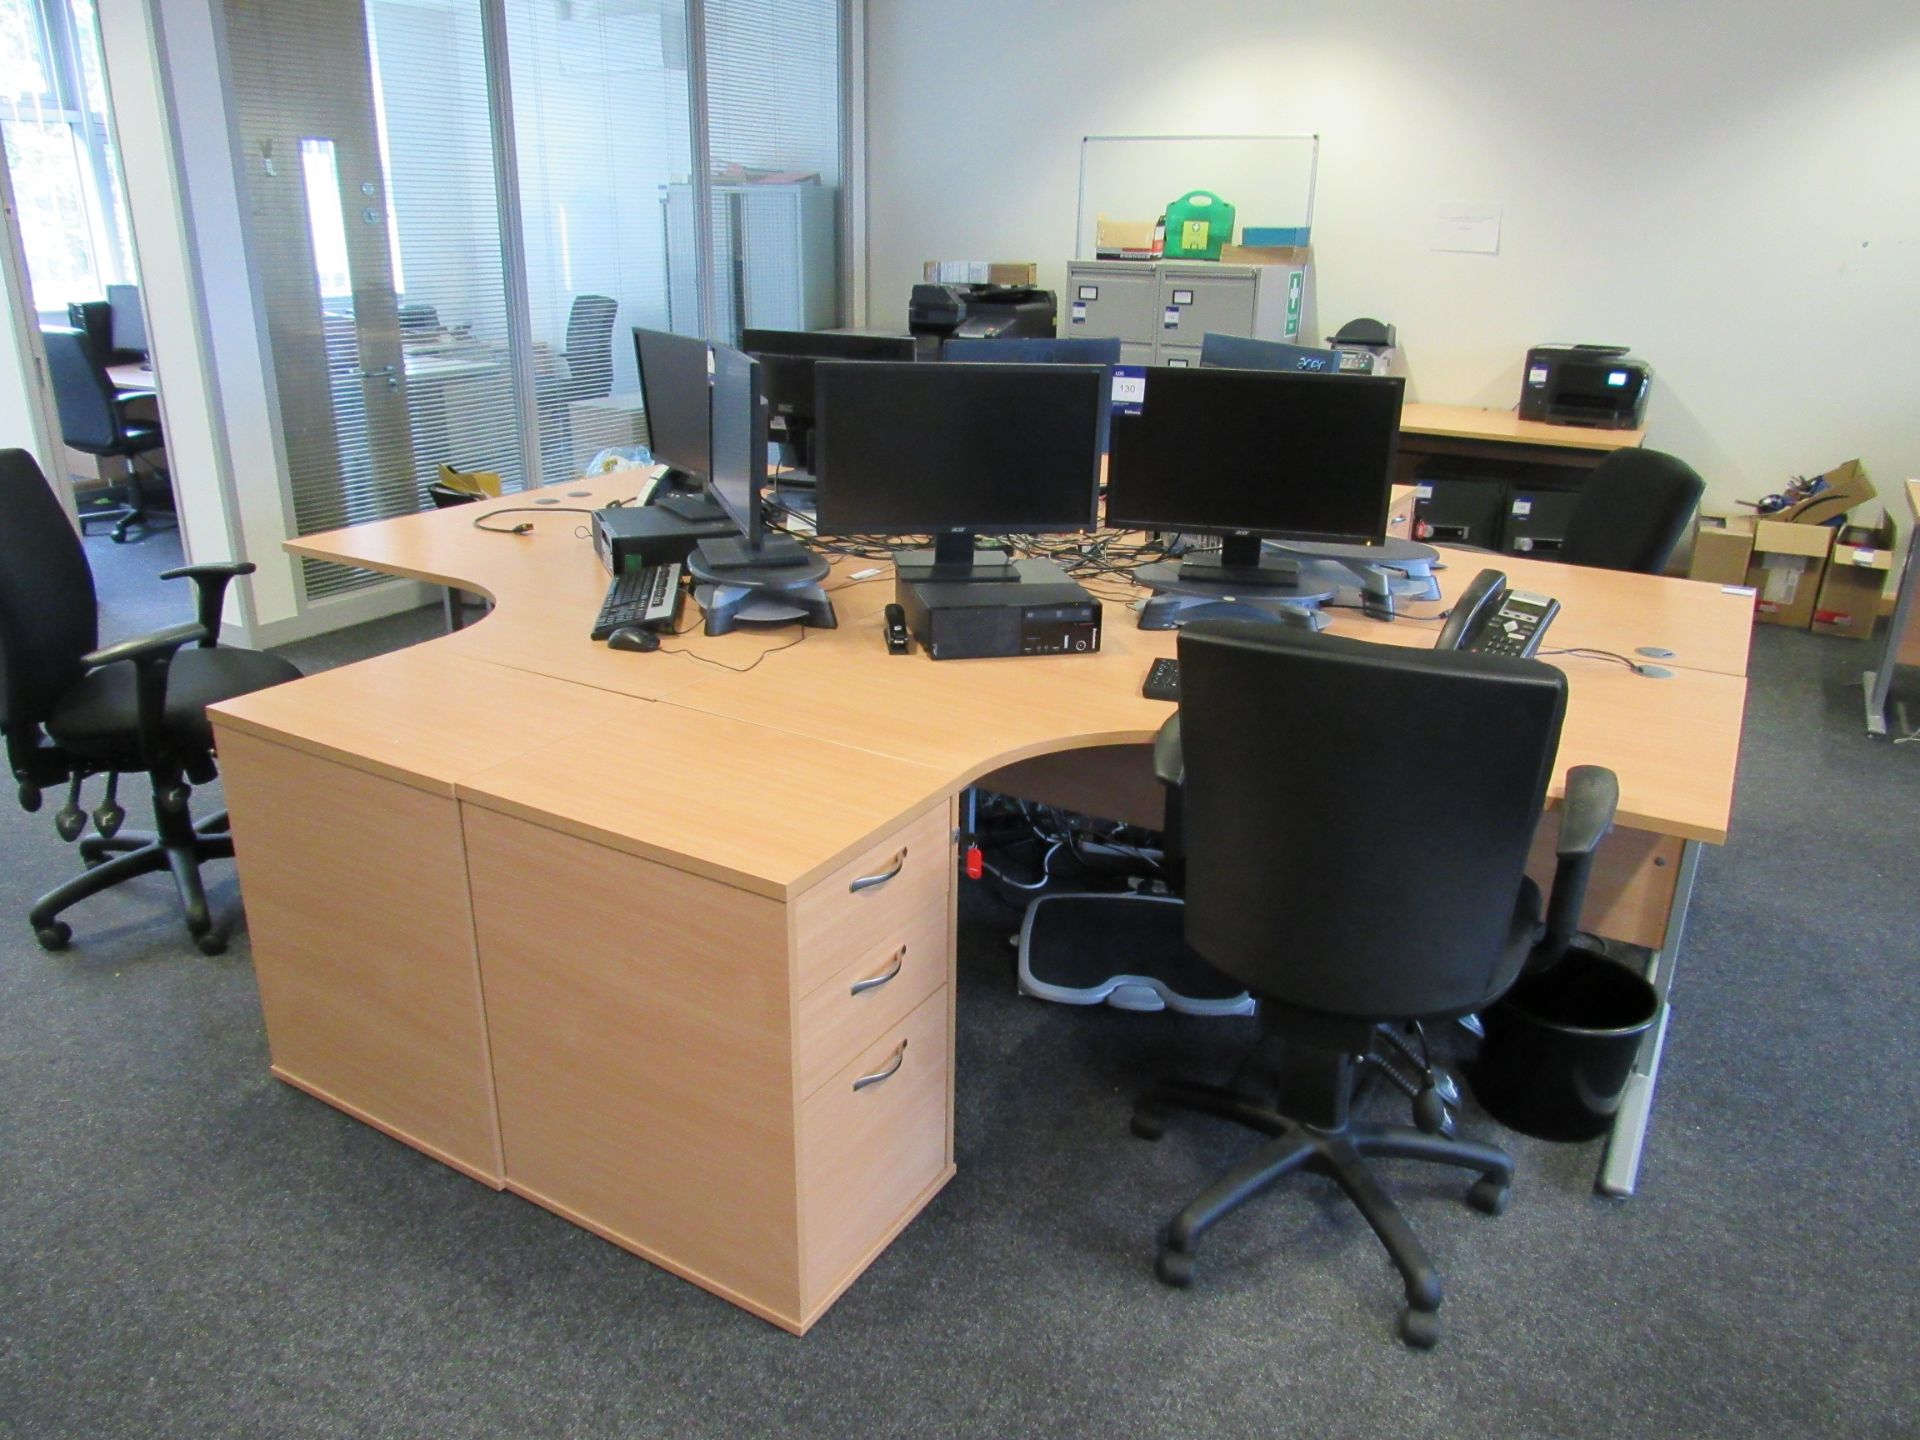 4 Beech Effect Radius Desks 1600x1200mm with 4 Desk High Multi Drawer Pedestals and 4 Upholstered